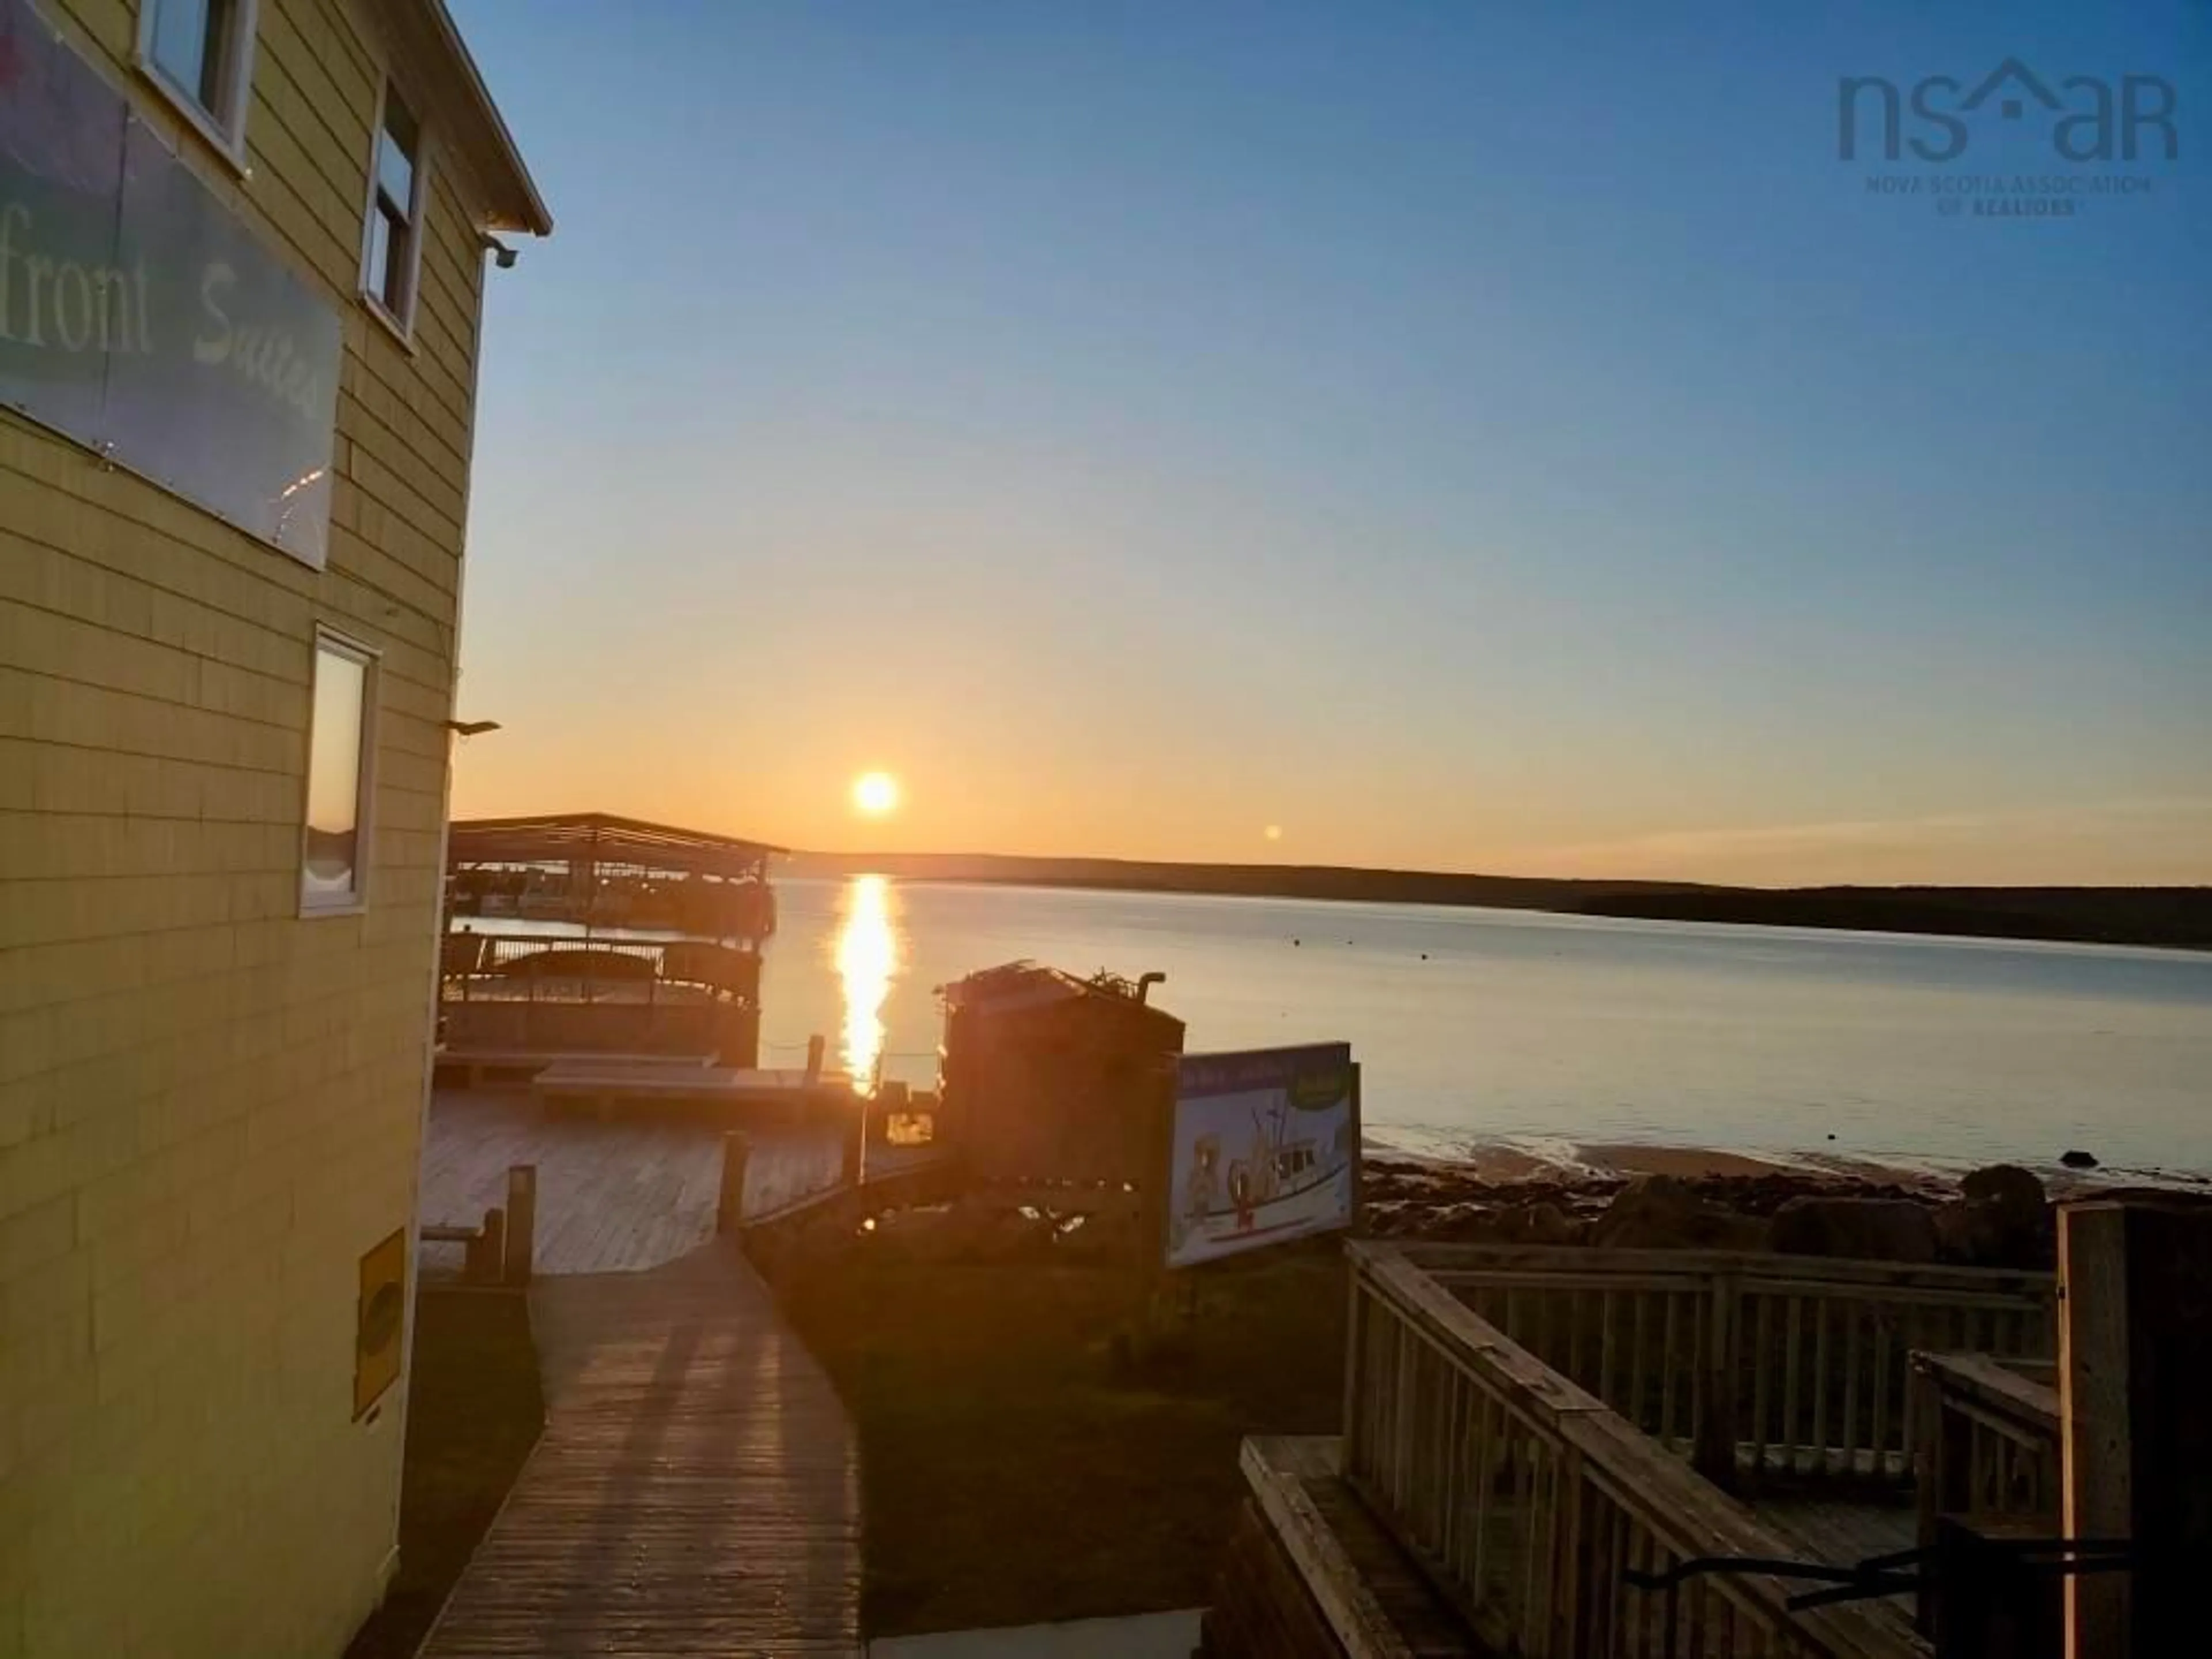 Lakeview for 25 Water St, Digby Nova Scotia B0V 1A0